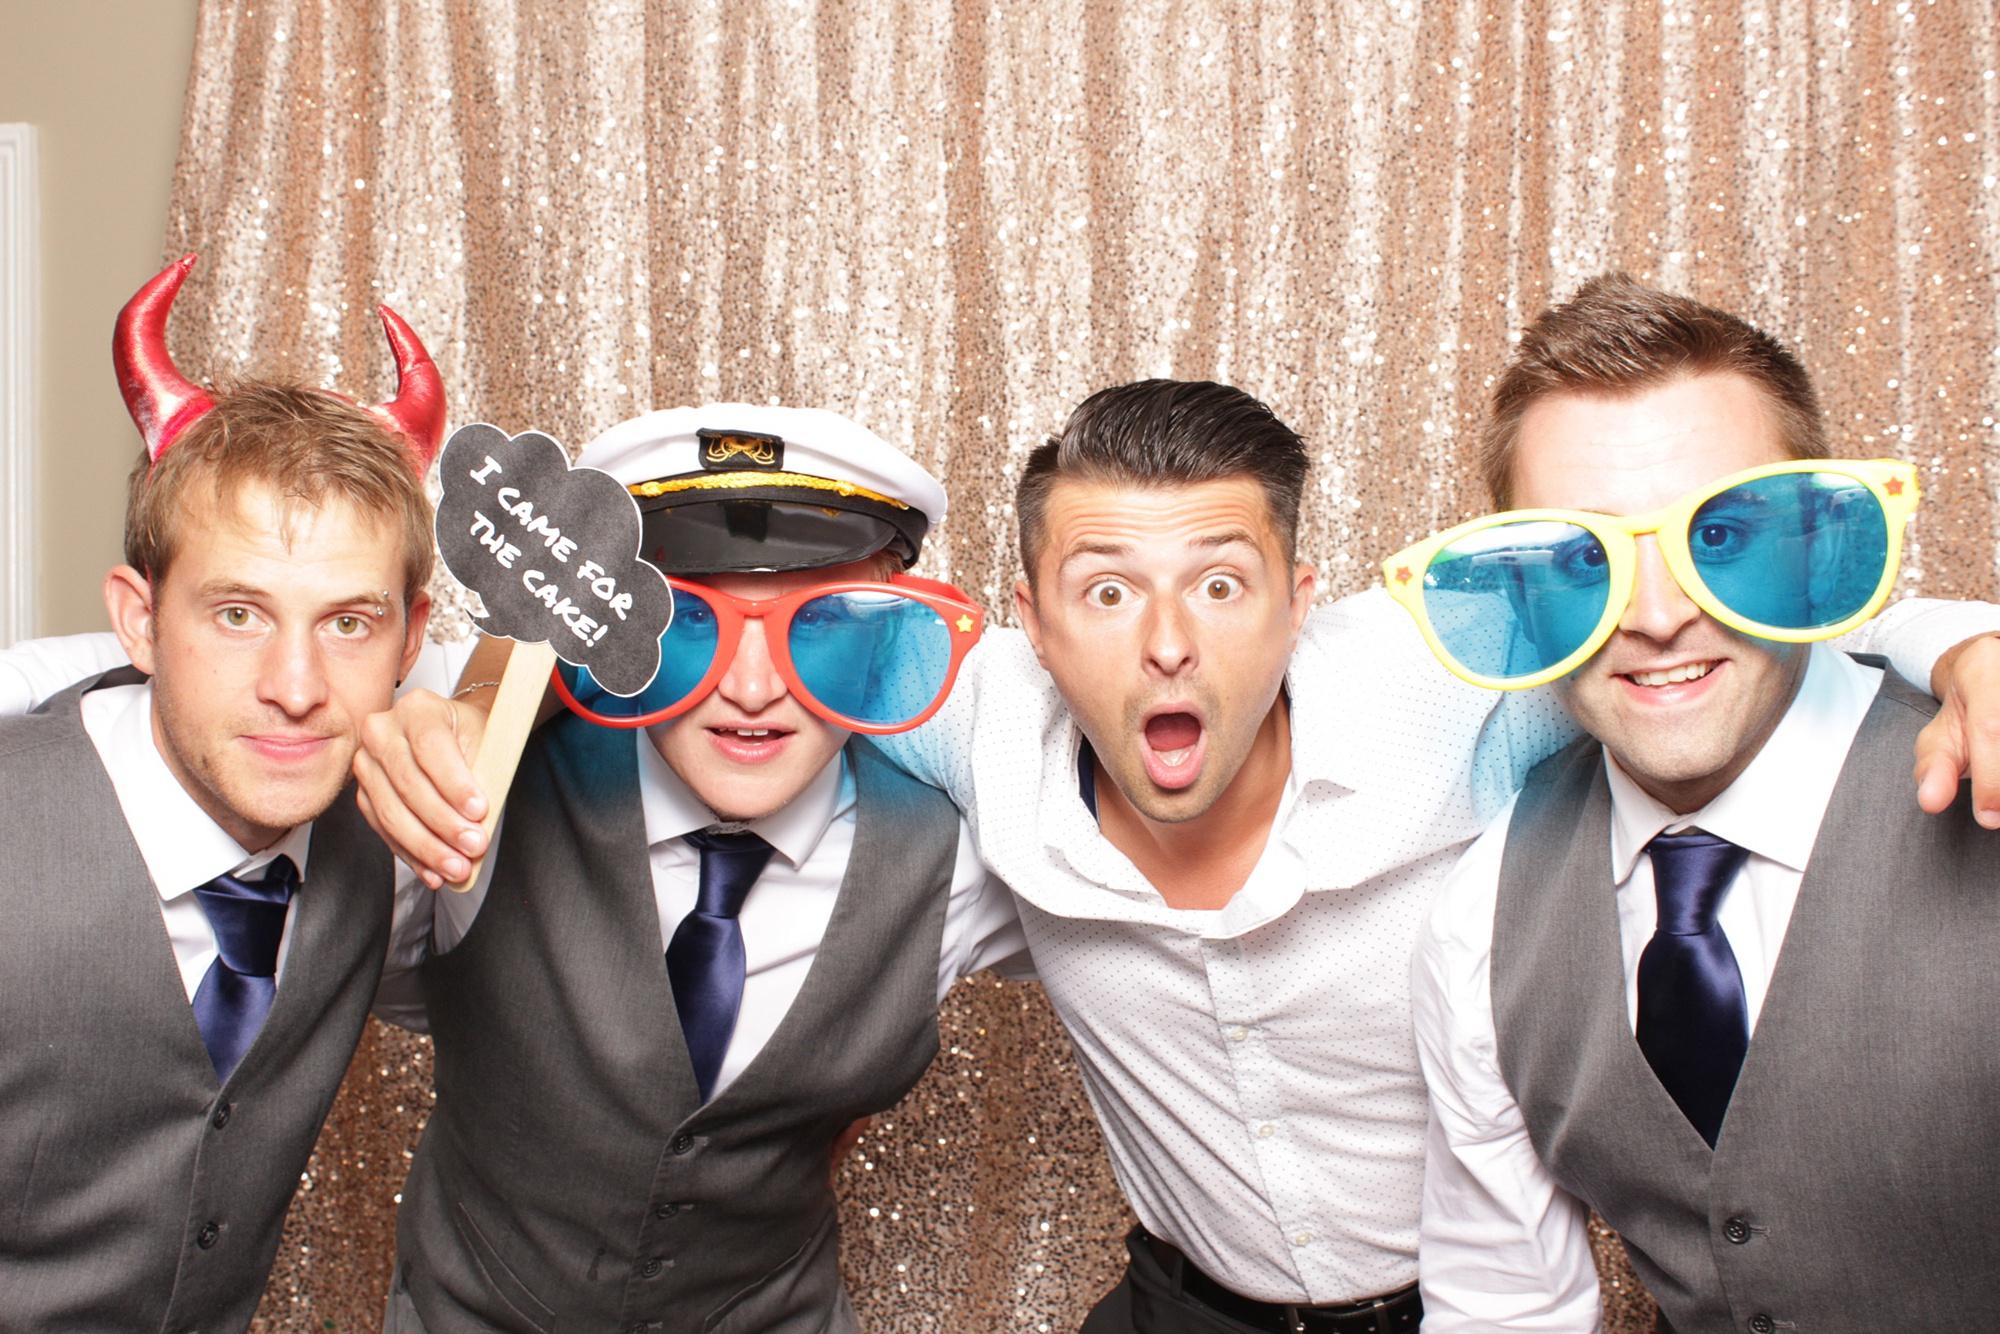 guests pose with big sunglasses during NJ wedding reception photo booth